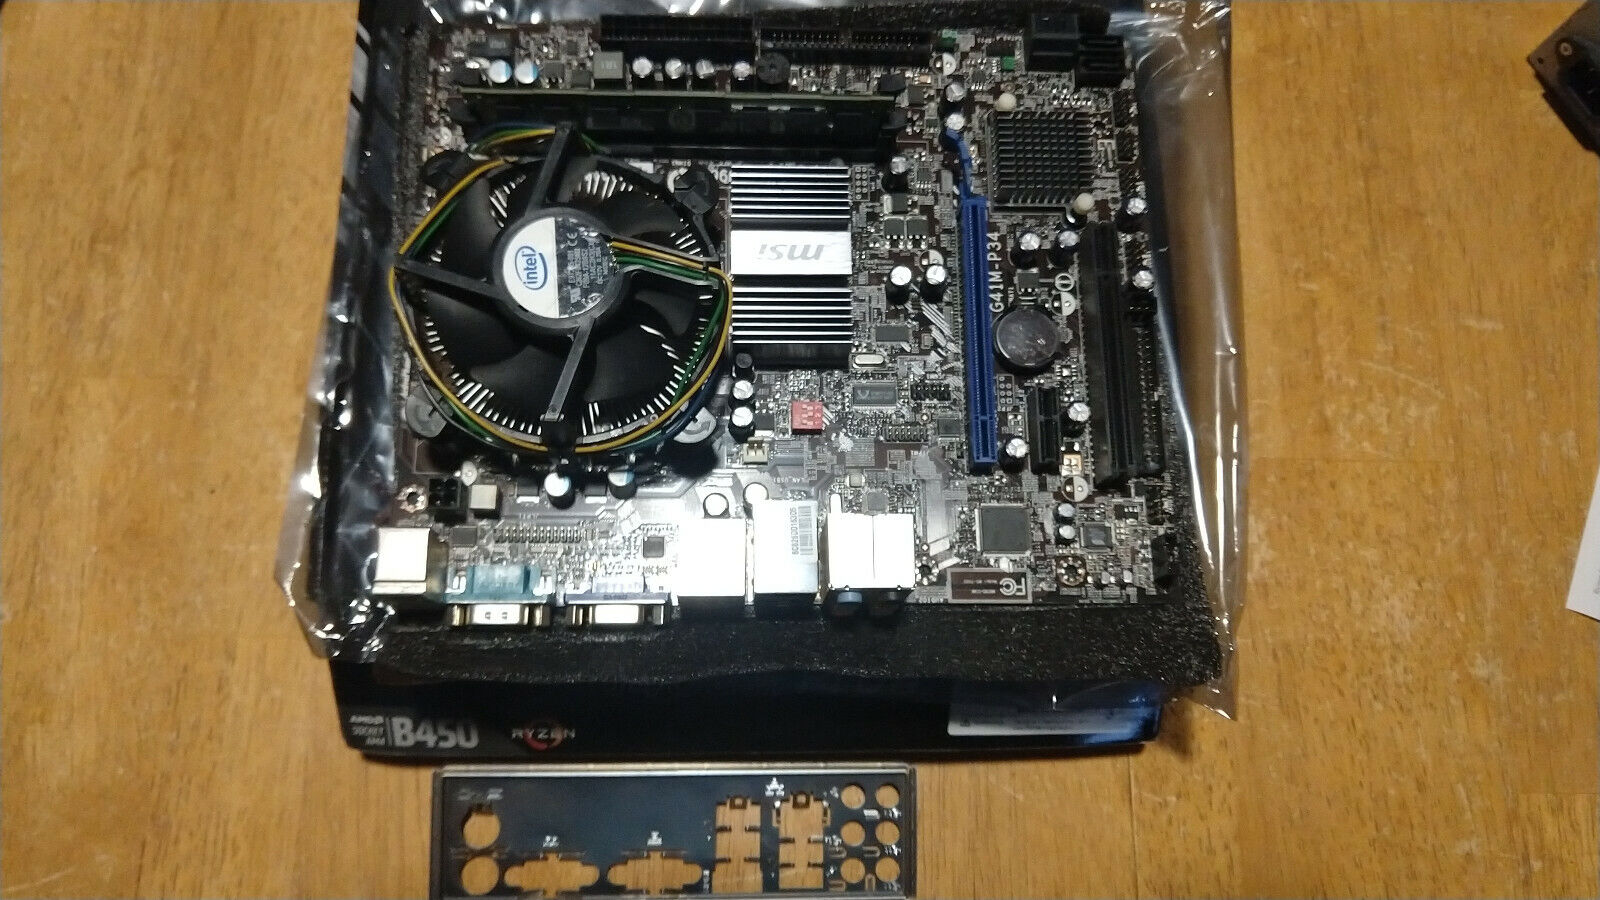 MSI G41M-P34 Motherboard with Intel E7500 Core 2 Duo CPU and Crucial 4GB RAM